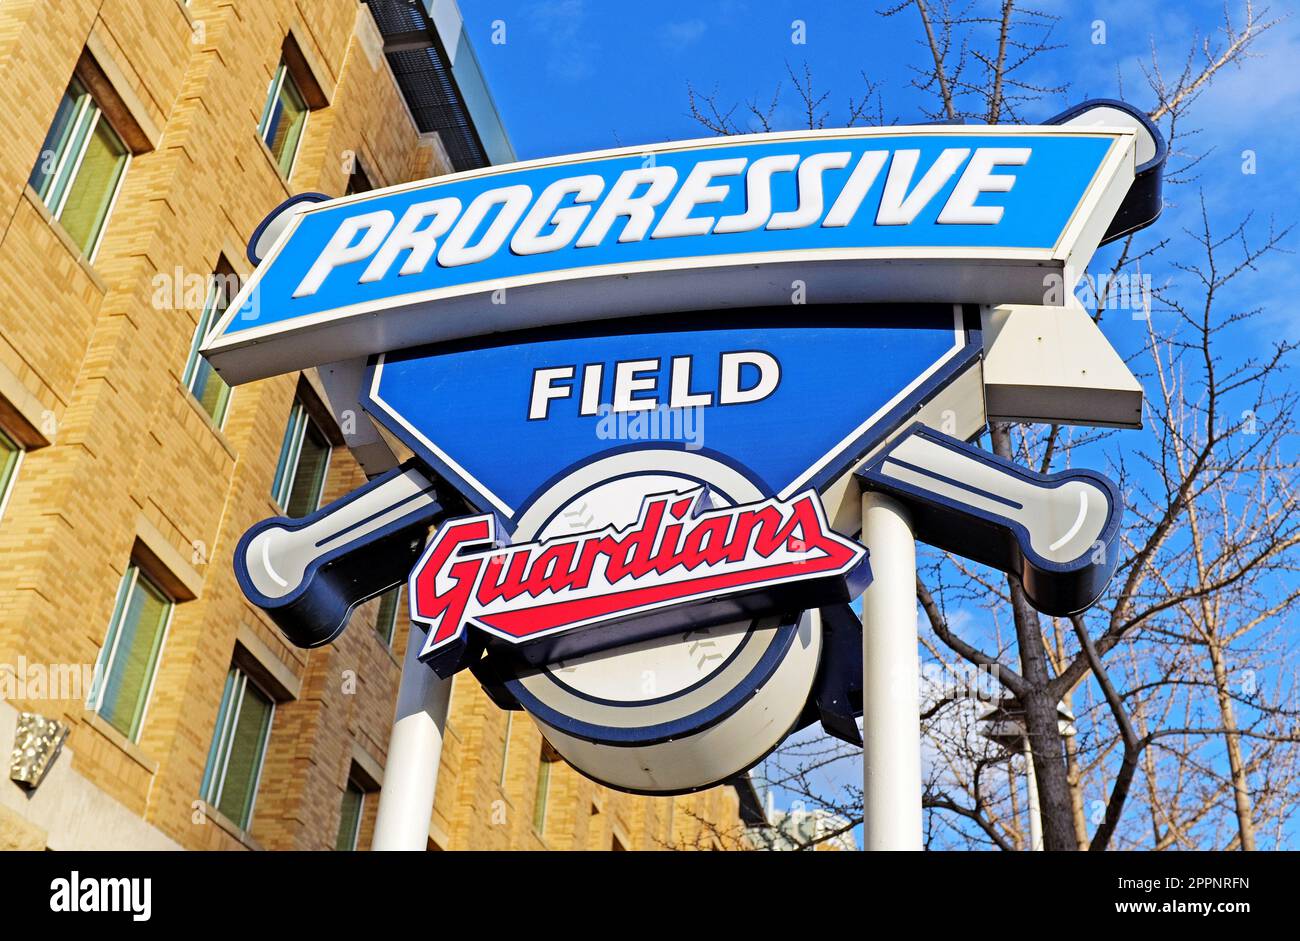 Progressive Field Guardians sign outside the Guardians baseball team home field in Cleveland, Ohio, USA Stock Photo